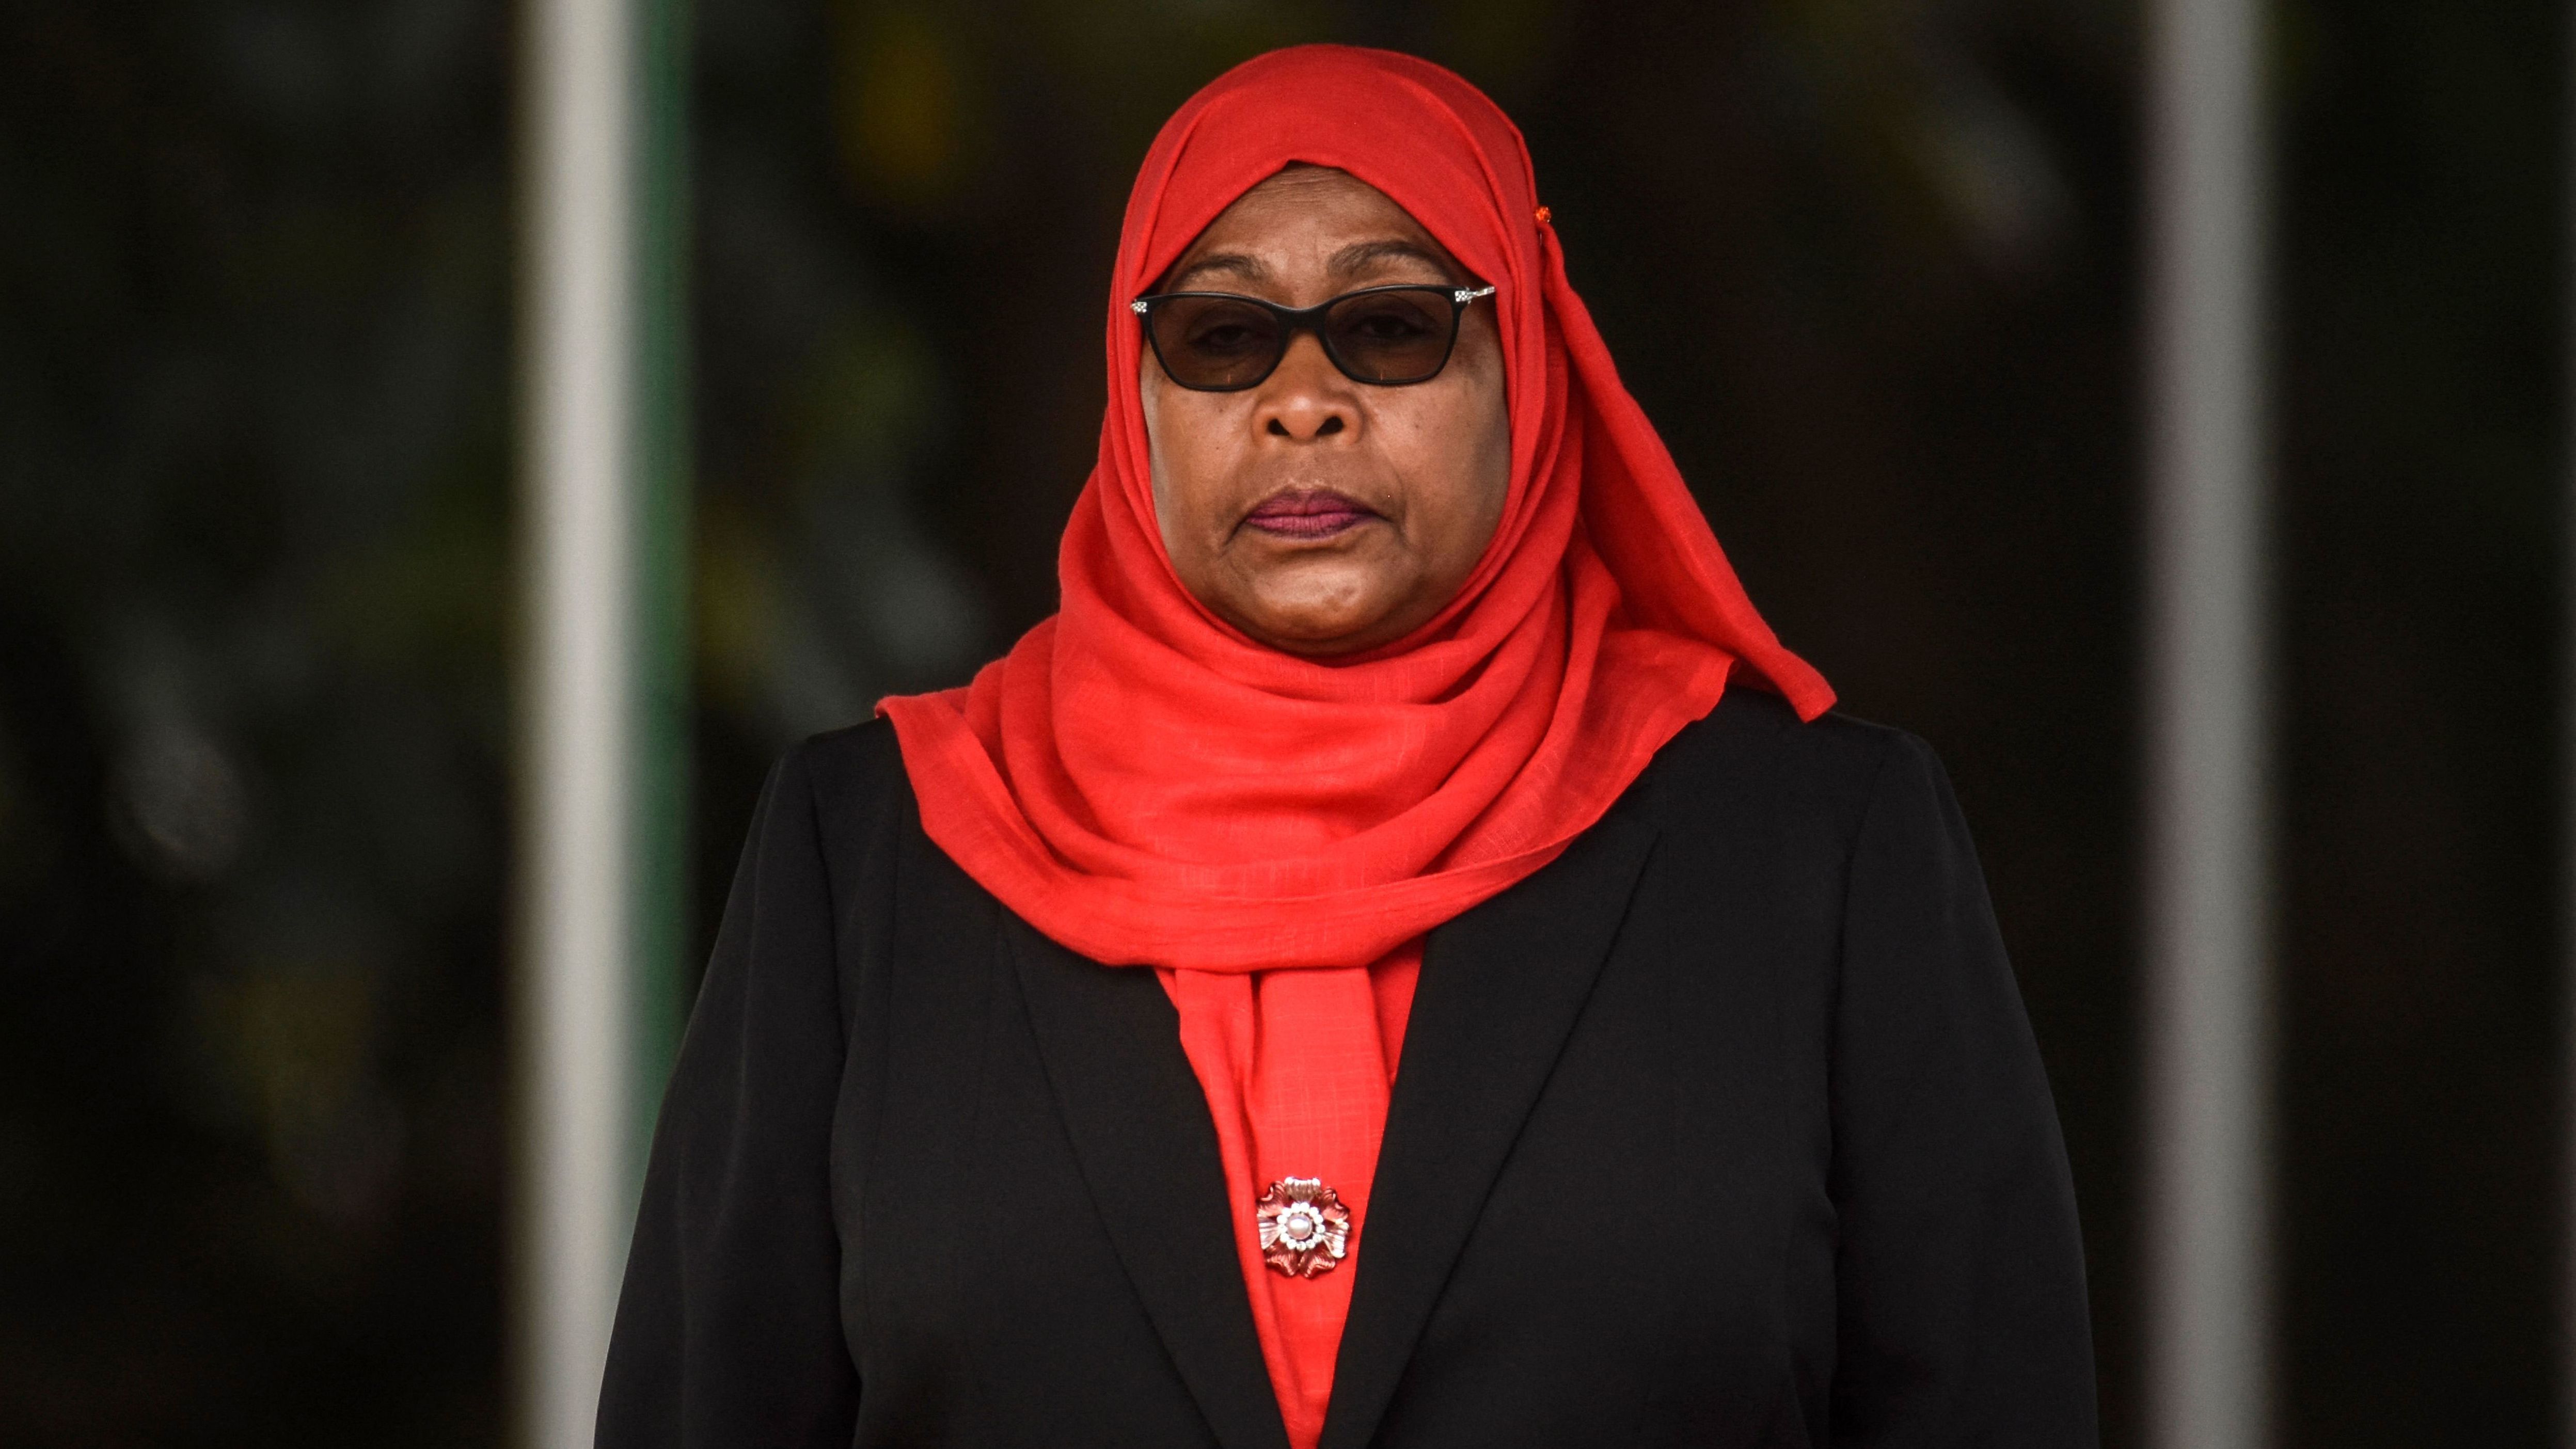 Tanzanian President Samia Suluhu Hassan inspects a military parade following her swearing in as the country's first female president Friday in Dar es Salaam, Tanzania.